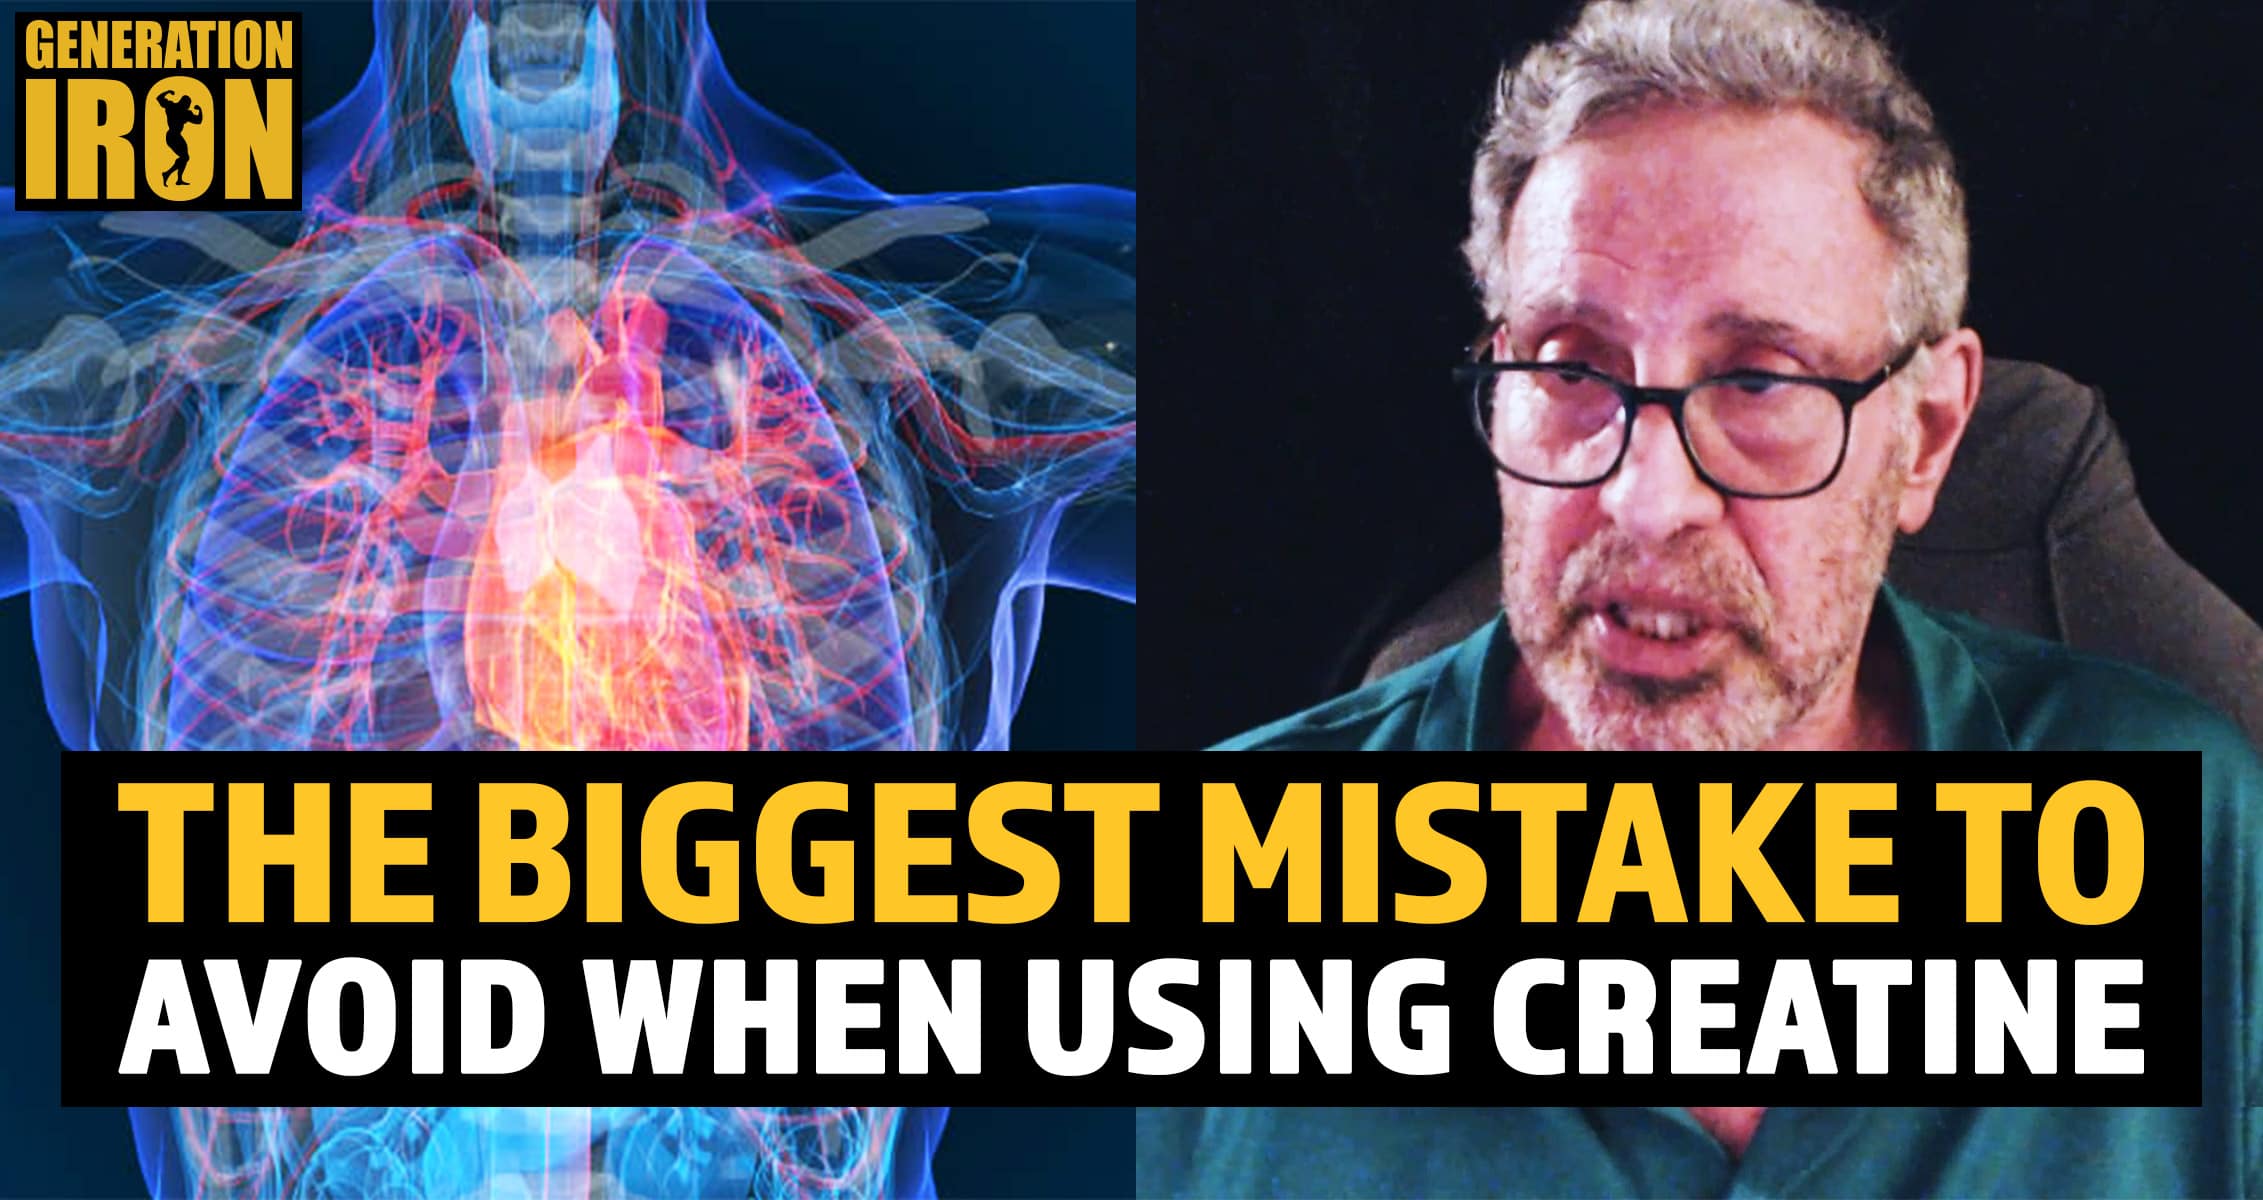 Straight Facts: The Biggest Mistake To Avoid When Using Creatine